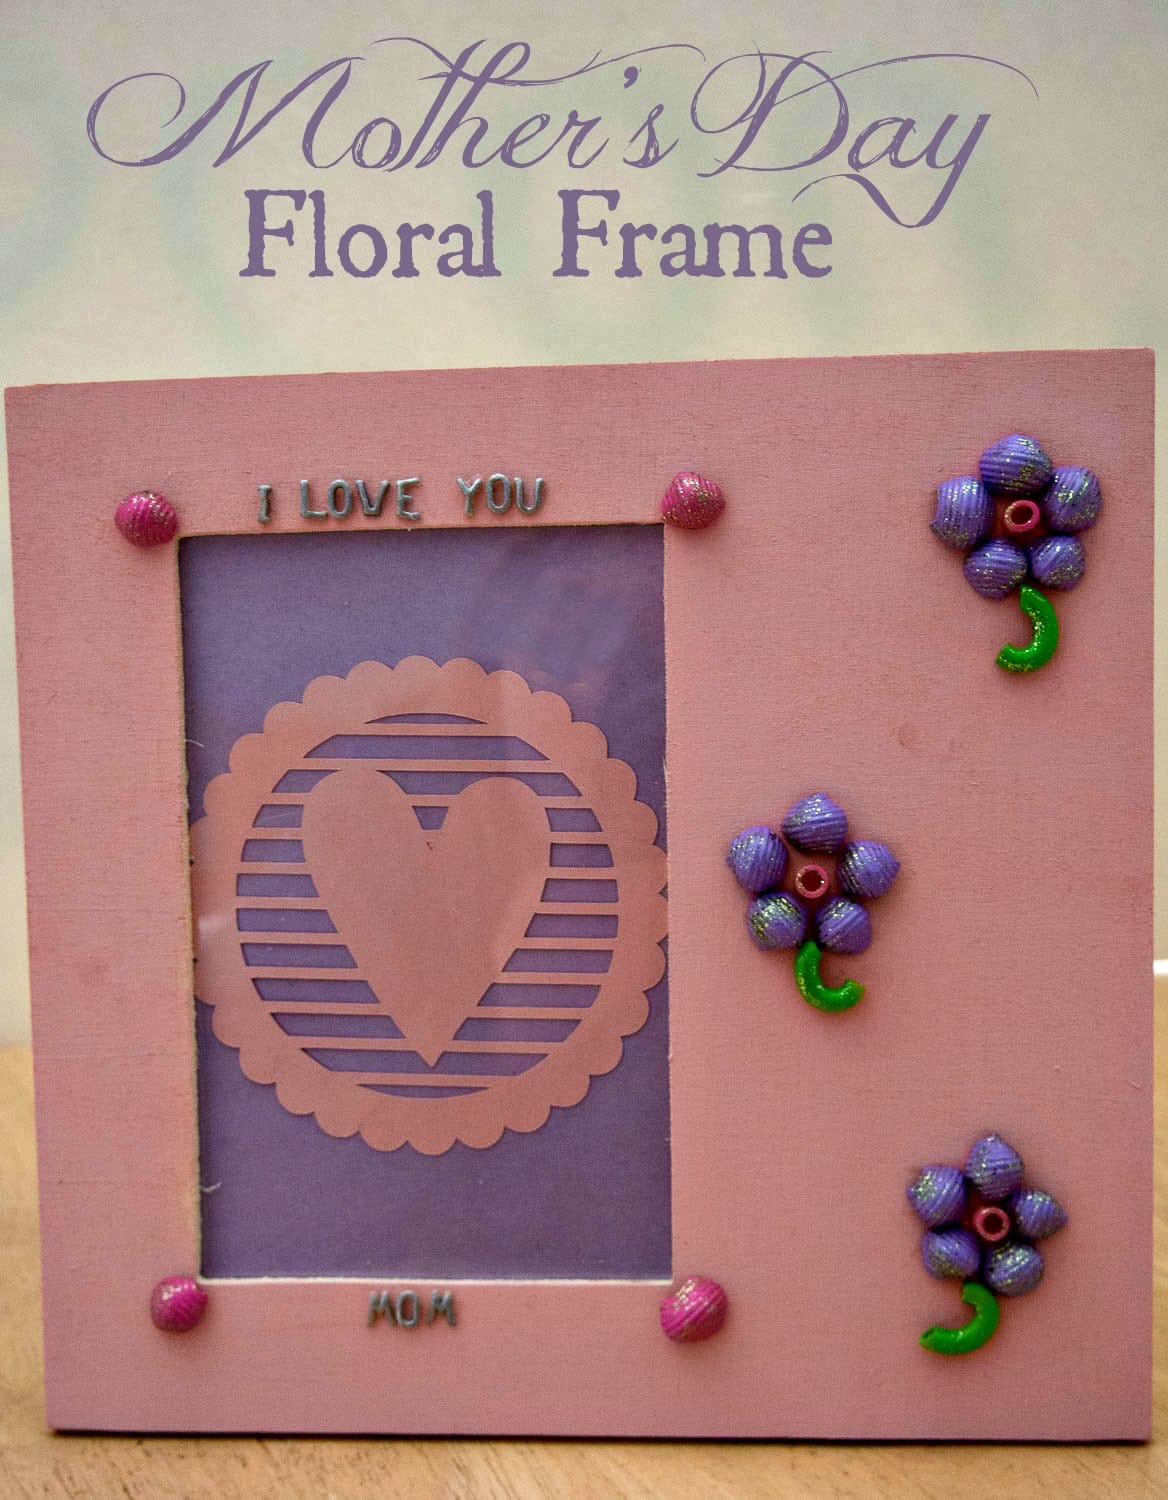 This Mother's Day Floral Frame makes a wonderful and inexpensive gift for your mom this year!  Decorate a wooden frame with pasta from your pantry.